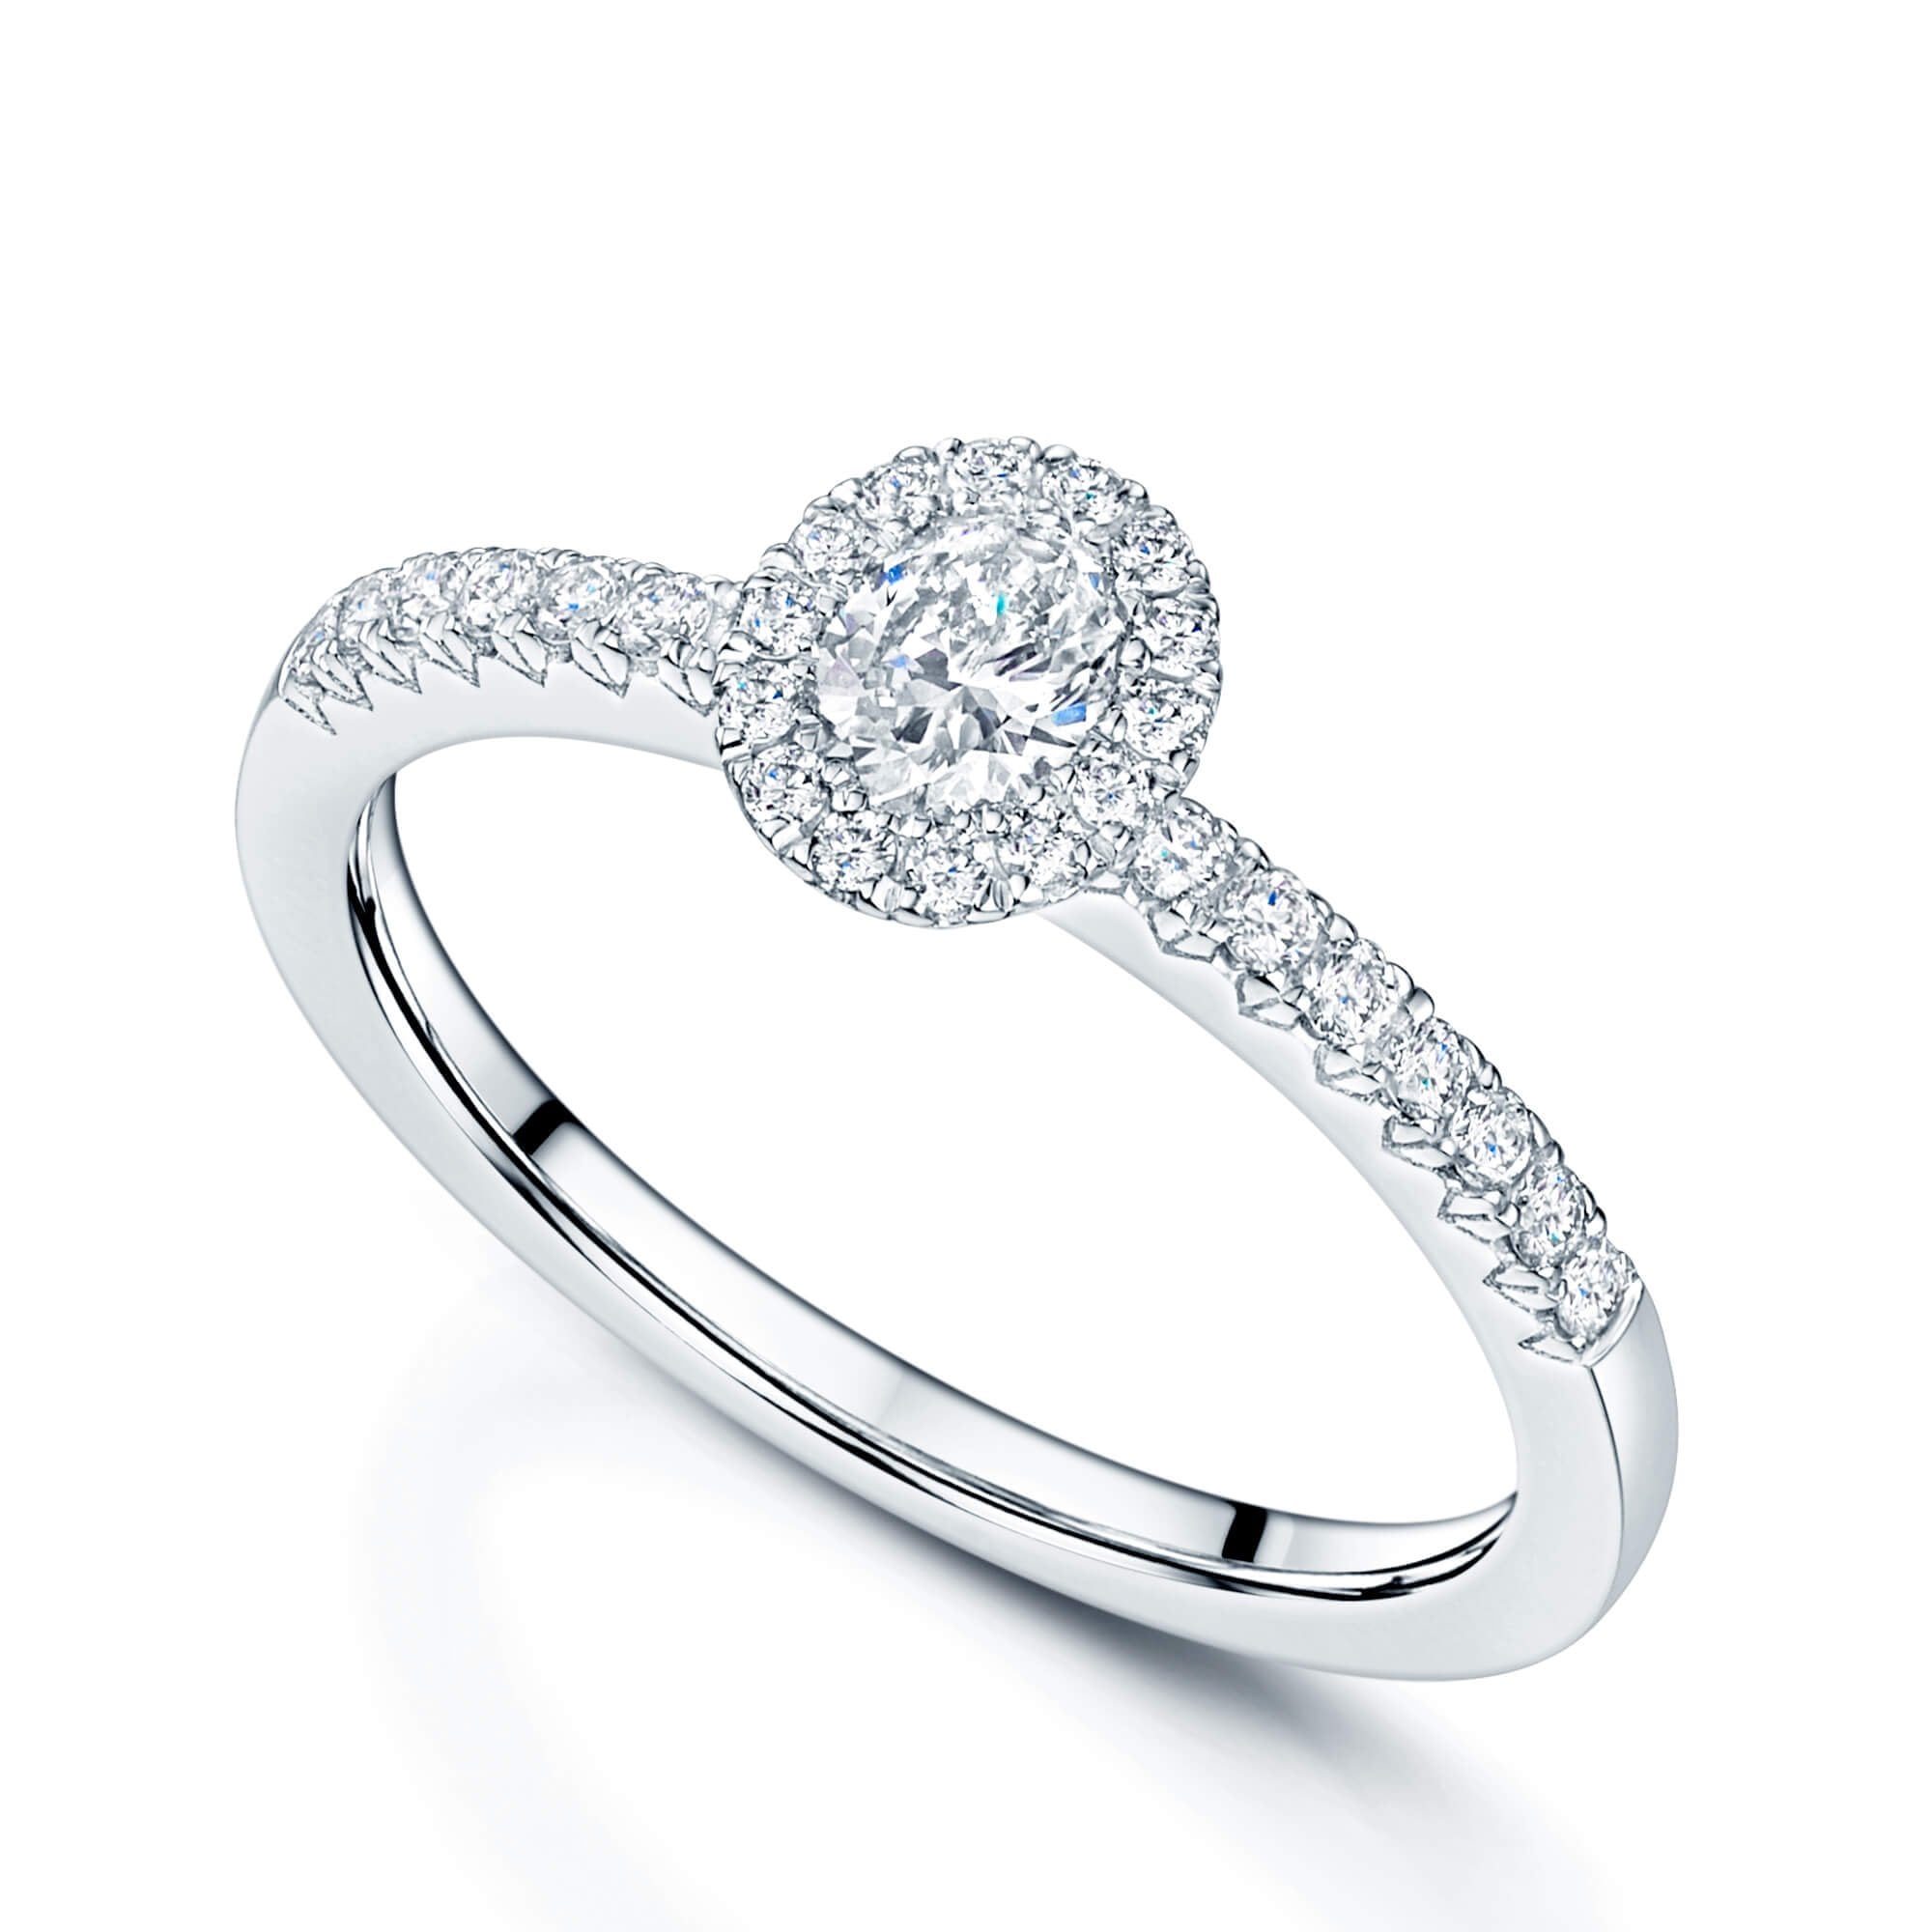 Platinum Oval Cut Diamond Ring With A Diamond Halo Surround And Shoulders